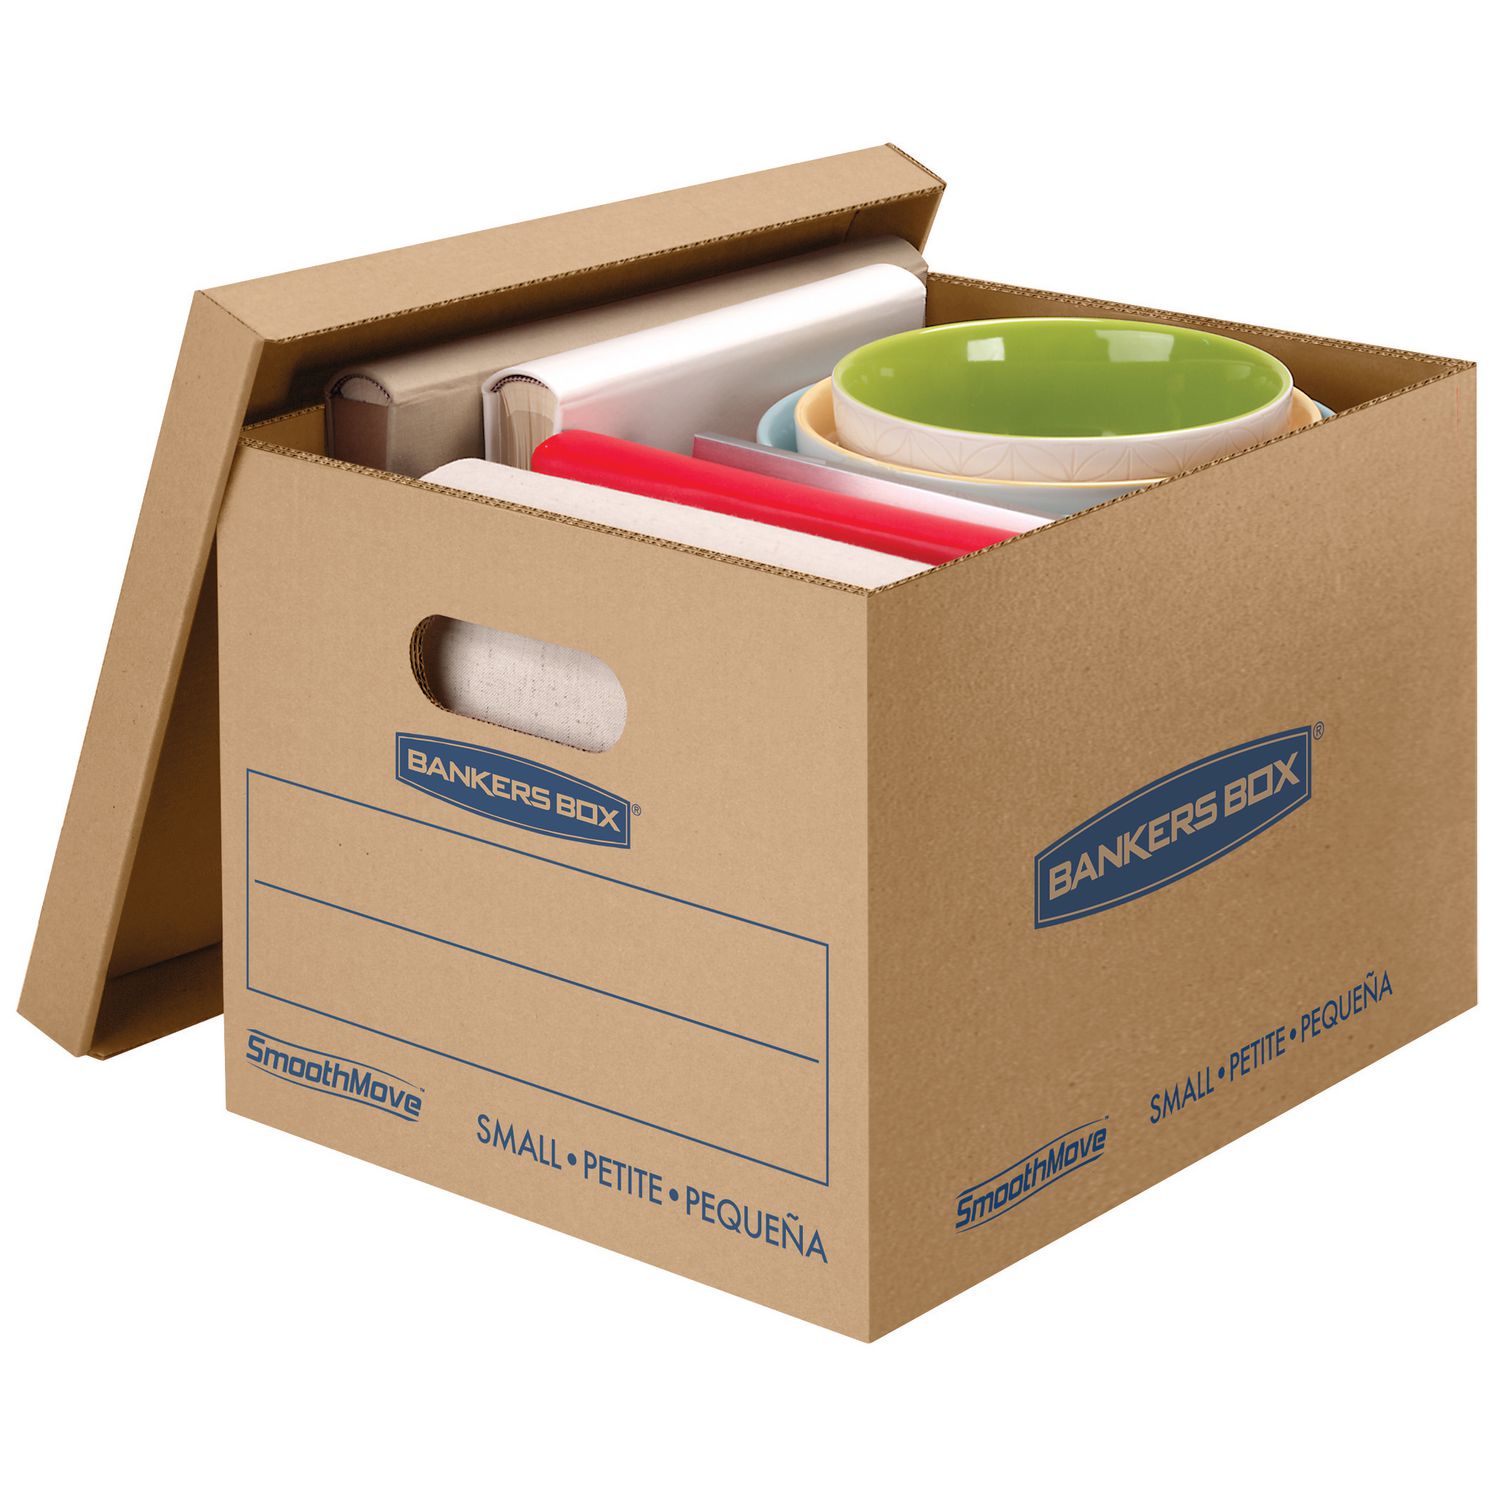 Small 7714210 Tape-Free Assembly Easy Carry Handles 15 x 12 x 10 Inches, Bankers Box SmoothMove Classic Moving Boxes 